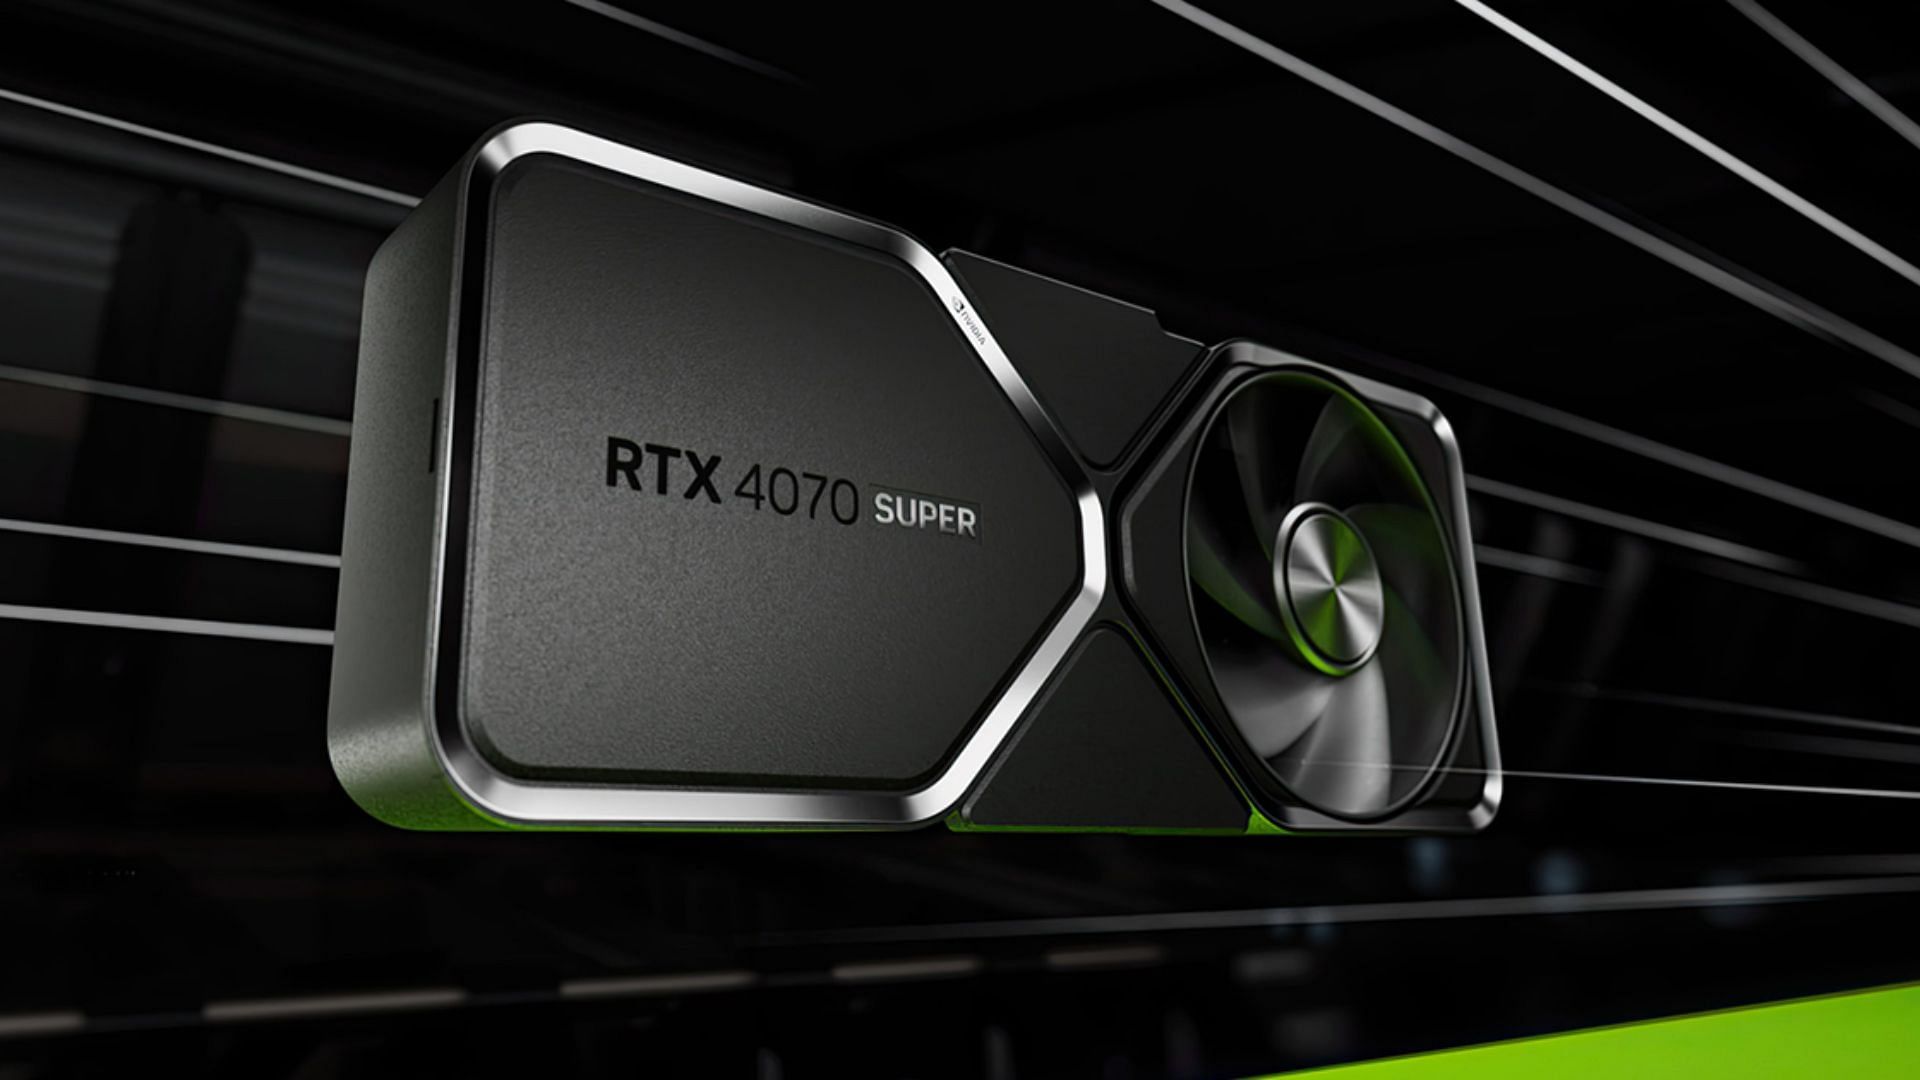 The new RTX 4070 Super bundles significant performance improvement over the 4070 (Image via Nvidia)